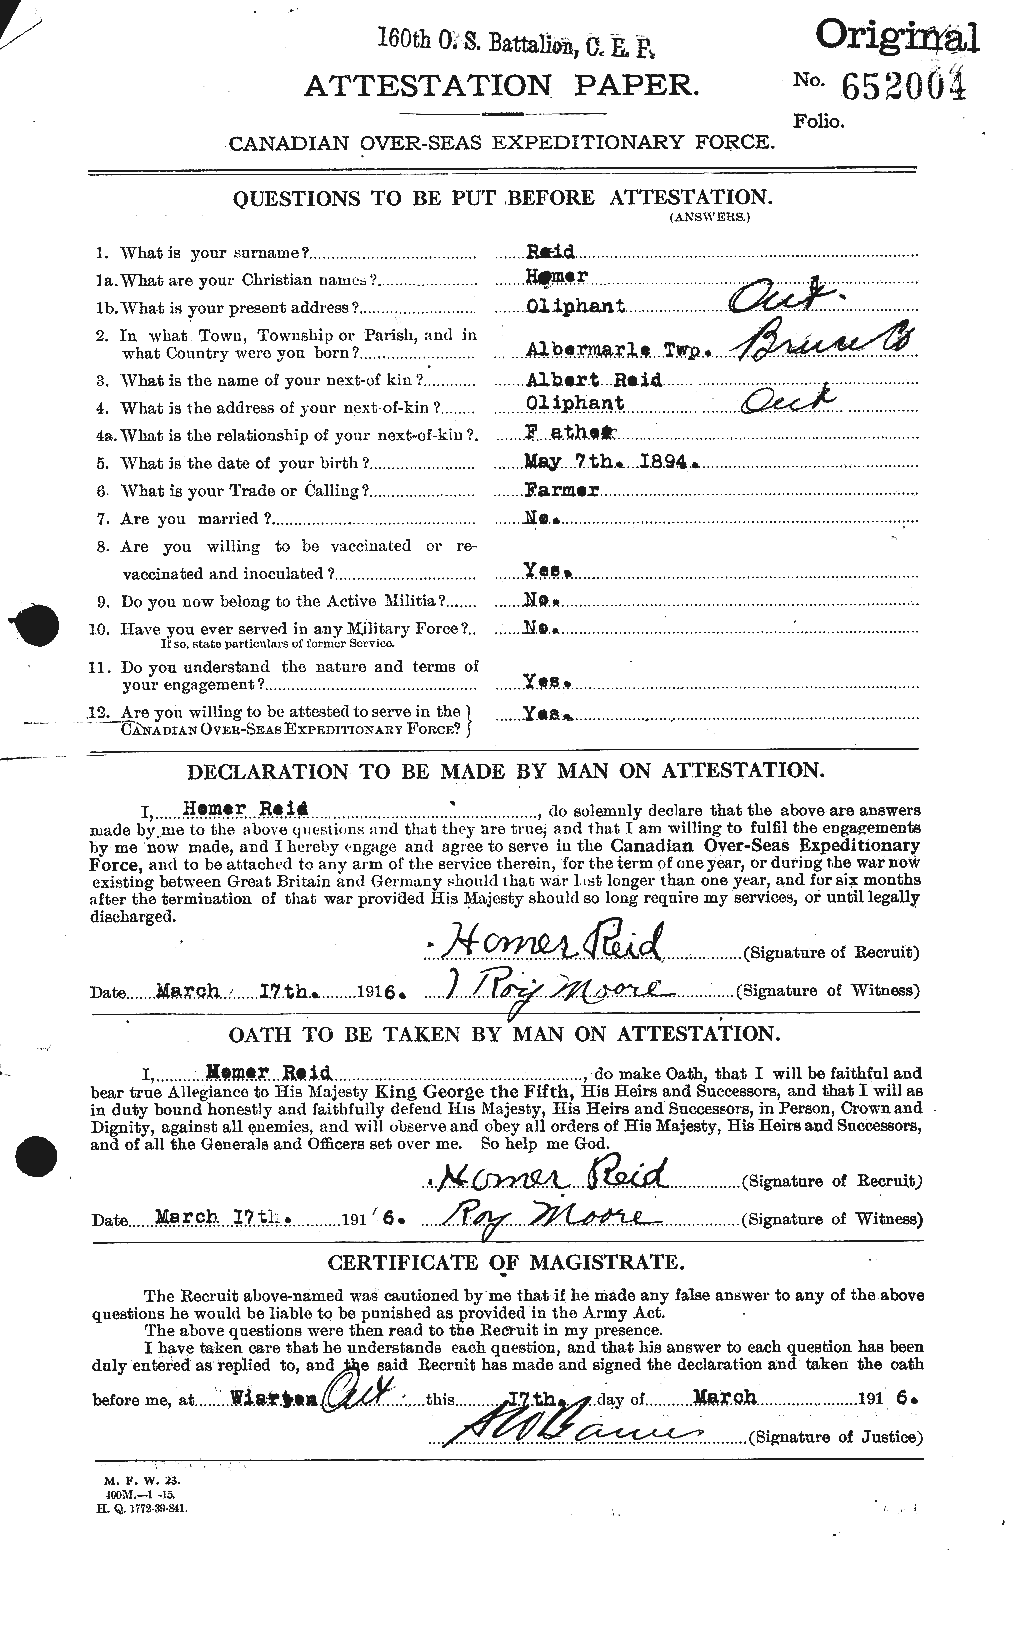 Personnel Records of the First World War - CEF 598612a